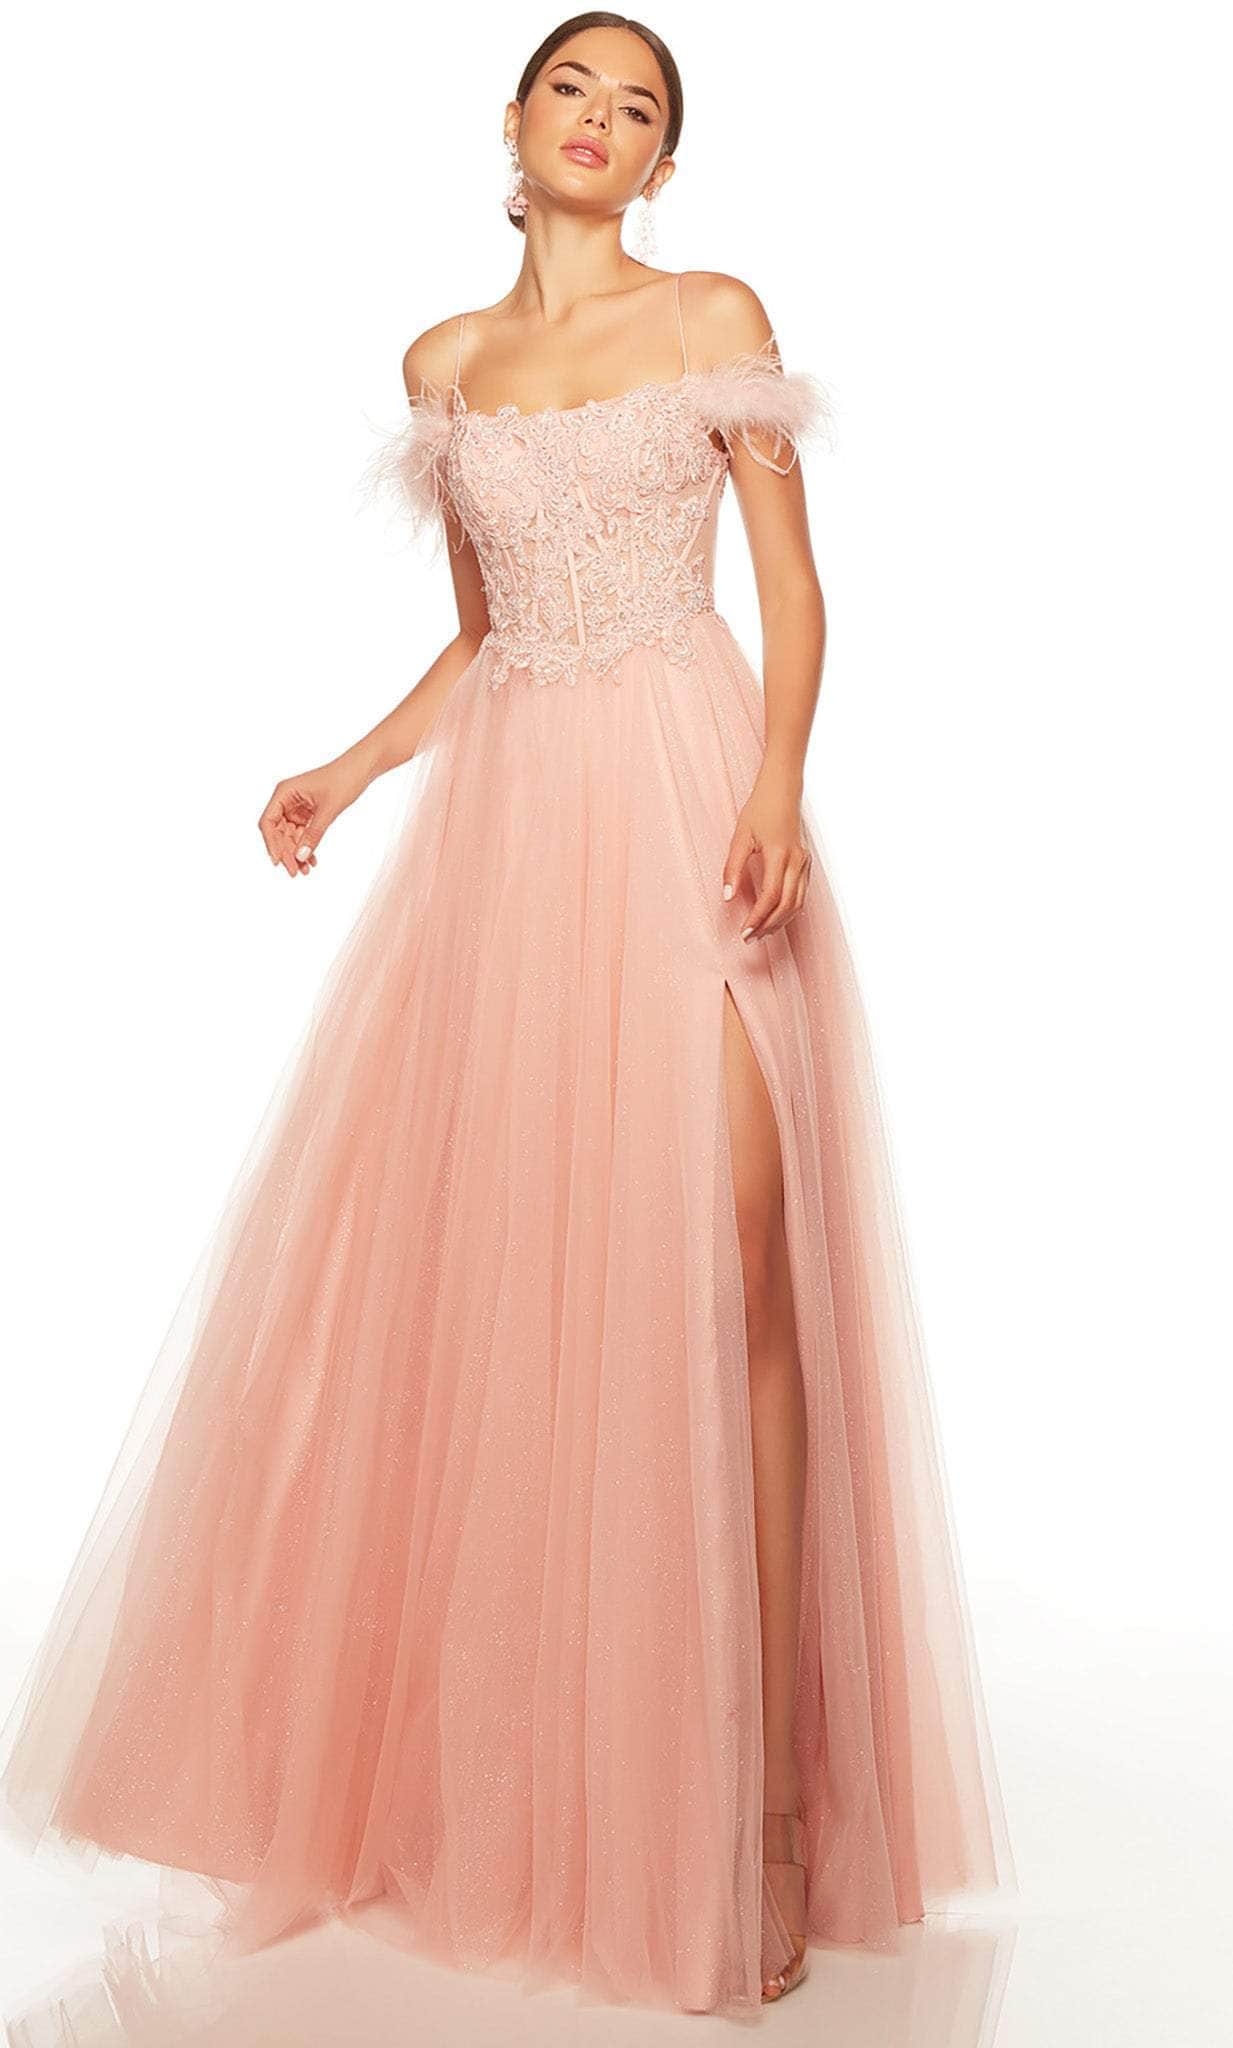 Image of Alyce Paris 61328 - Feathered Off Shoulder Evening Gown